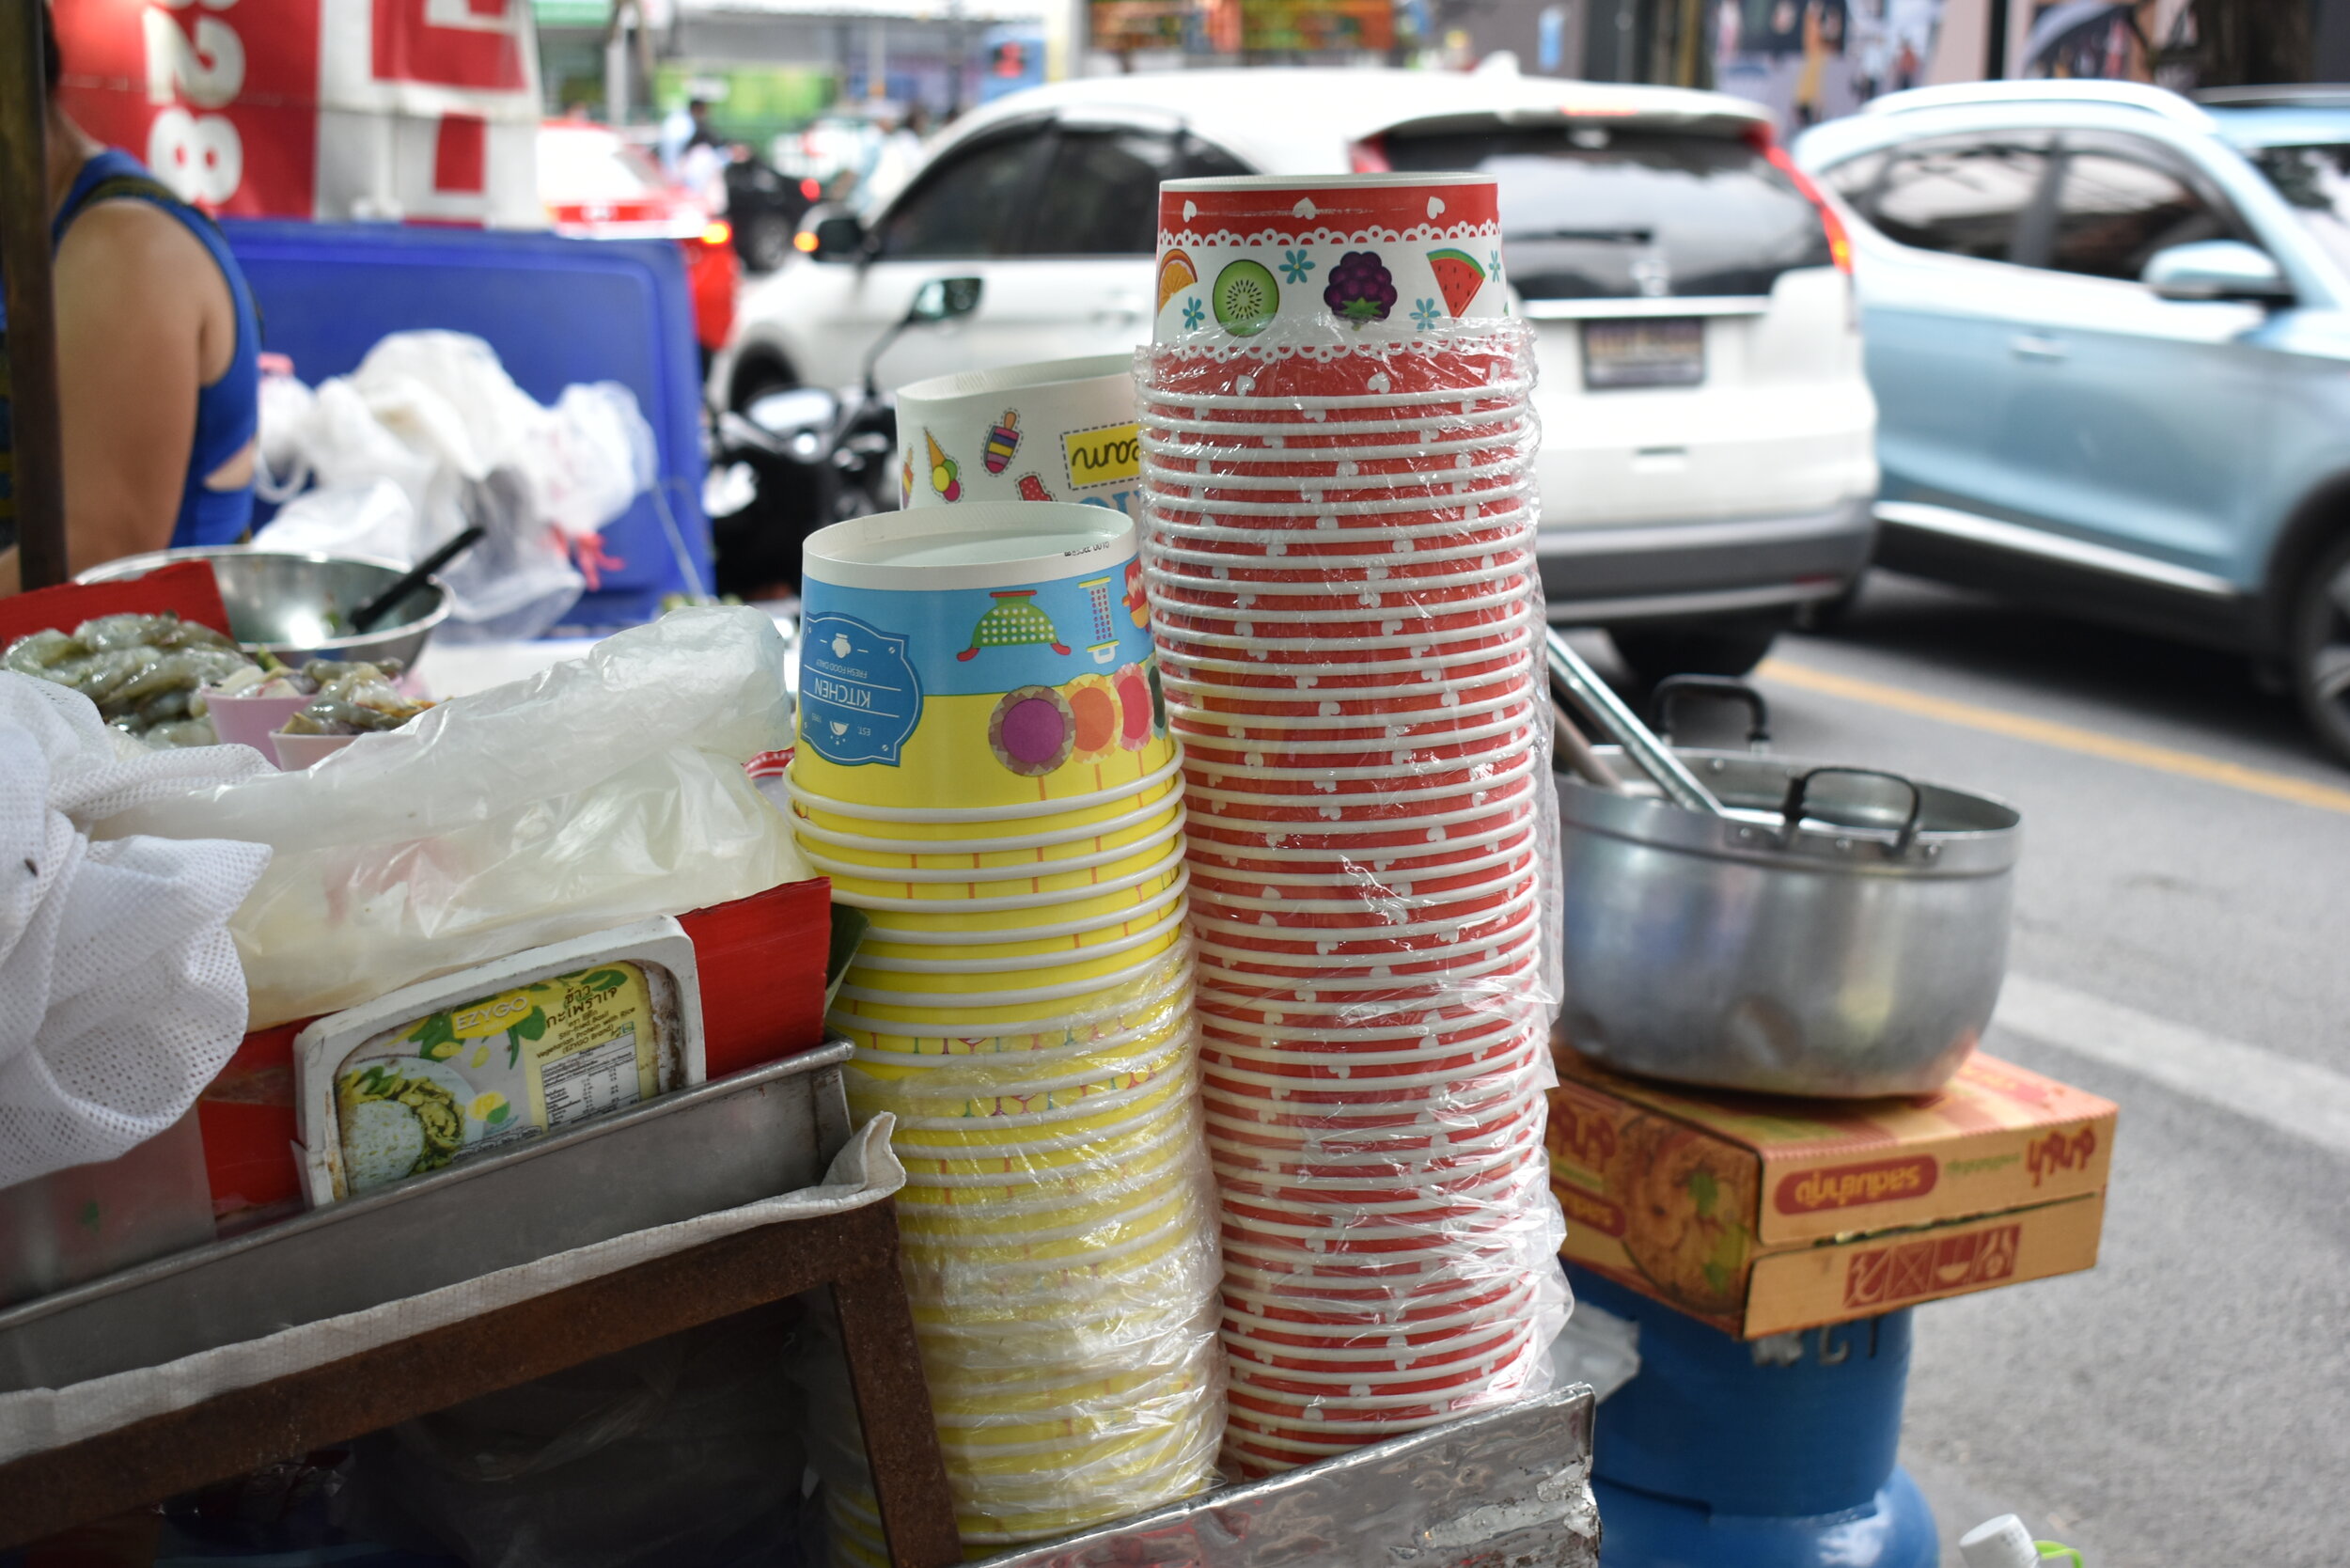 Stacks of food containers2.JPG